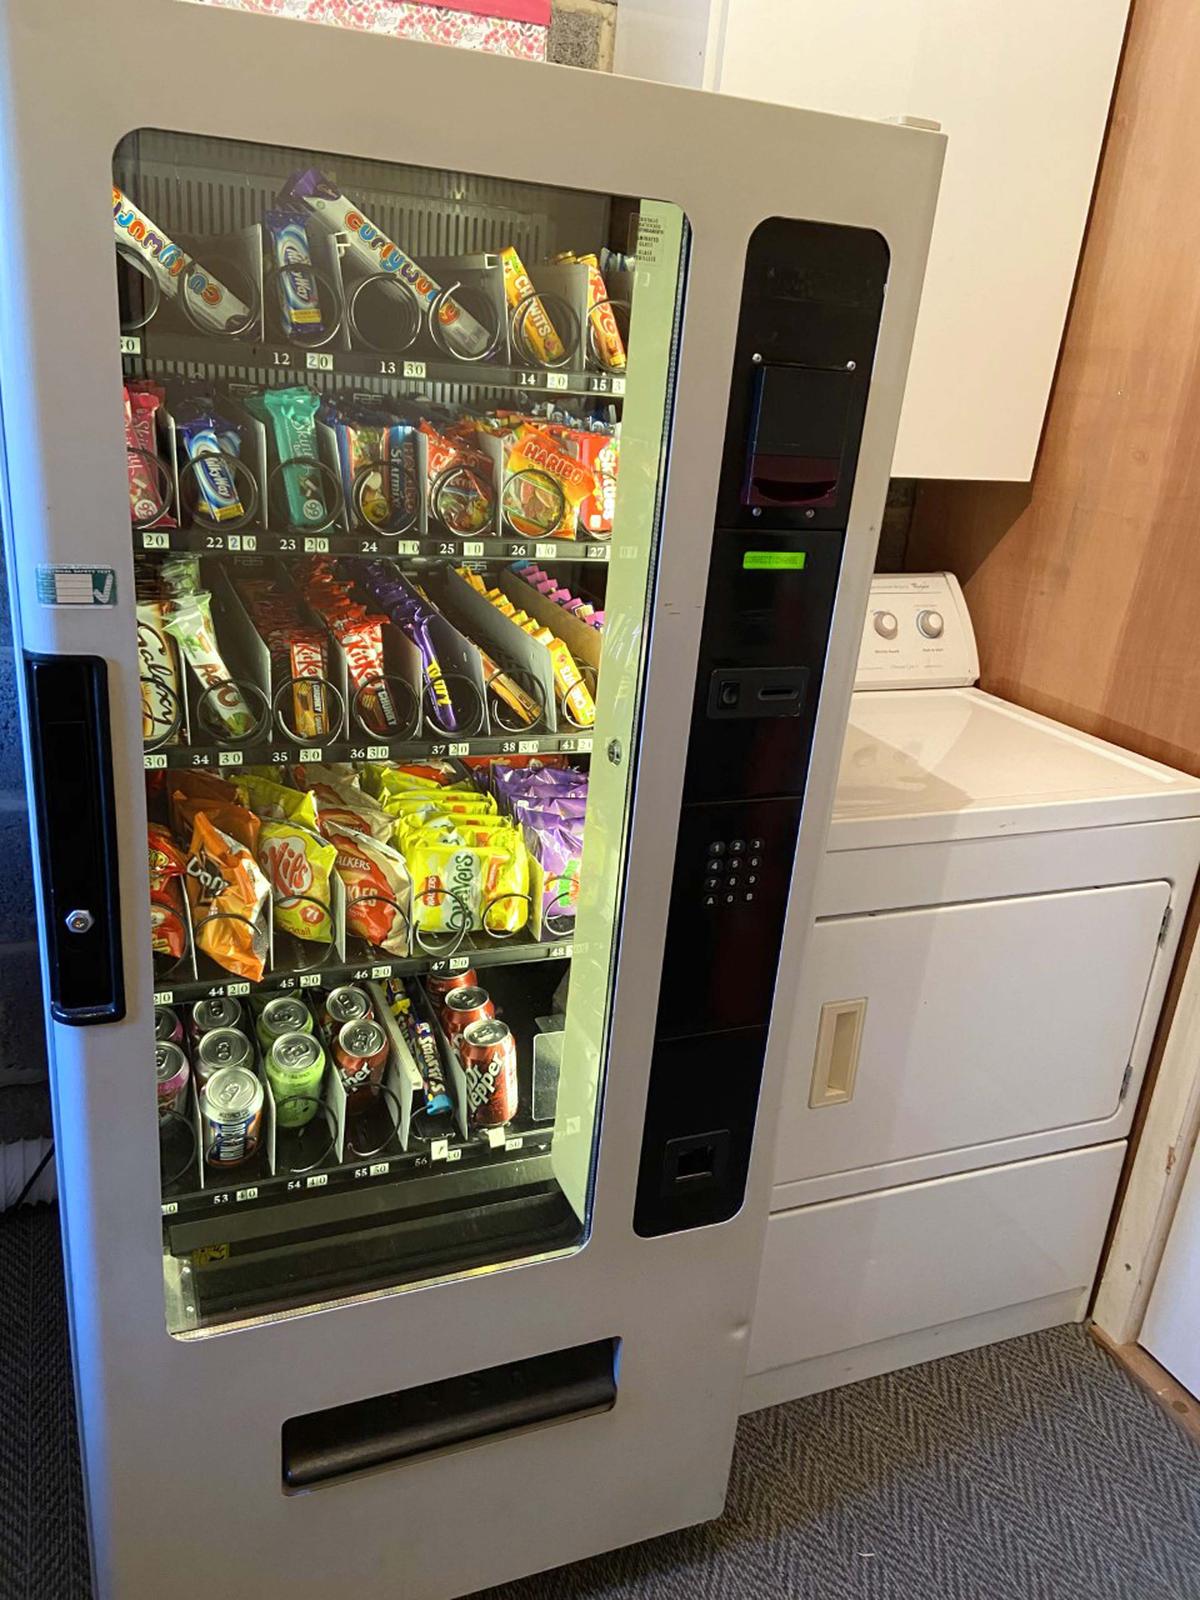 The vending machine Sarah Balsdon bought so her kids could pay for their own treats and snacks (Caters News)